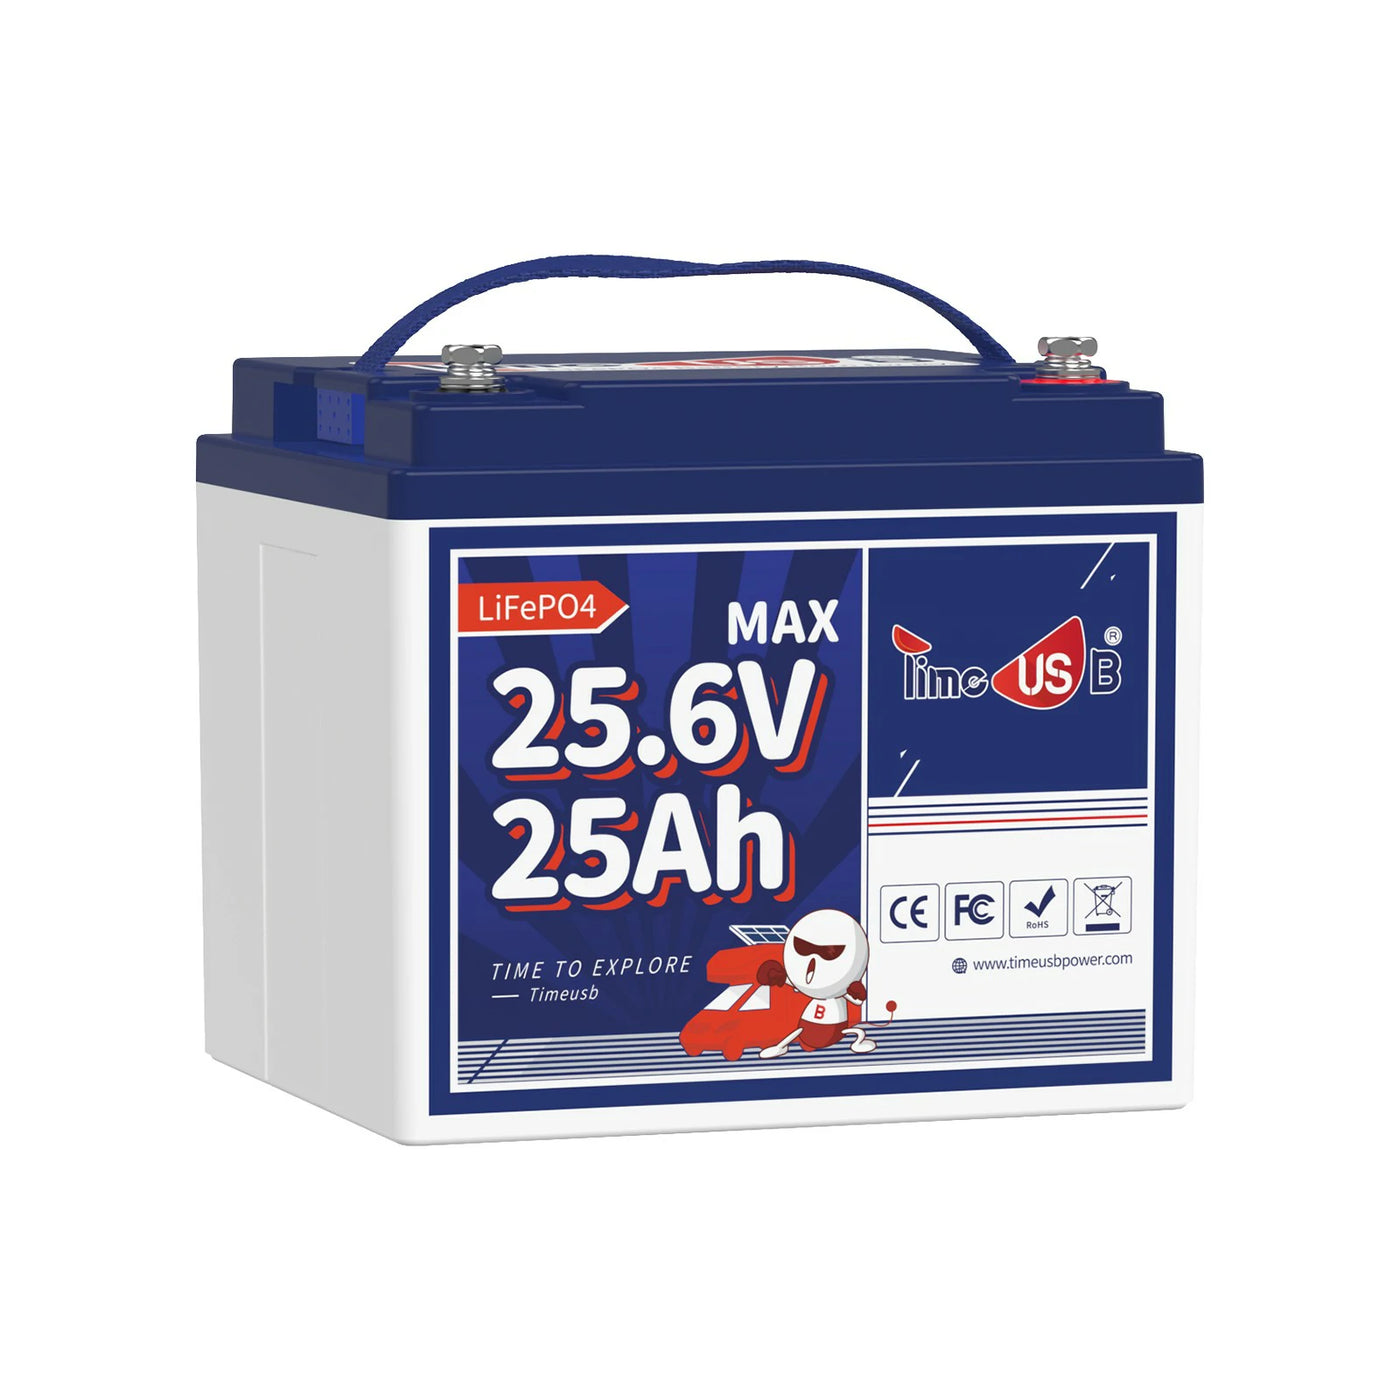 Timeusb 24V 25Ah LiFePO4 Battery, 640Wh & 50A BMS